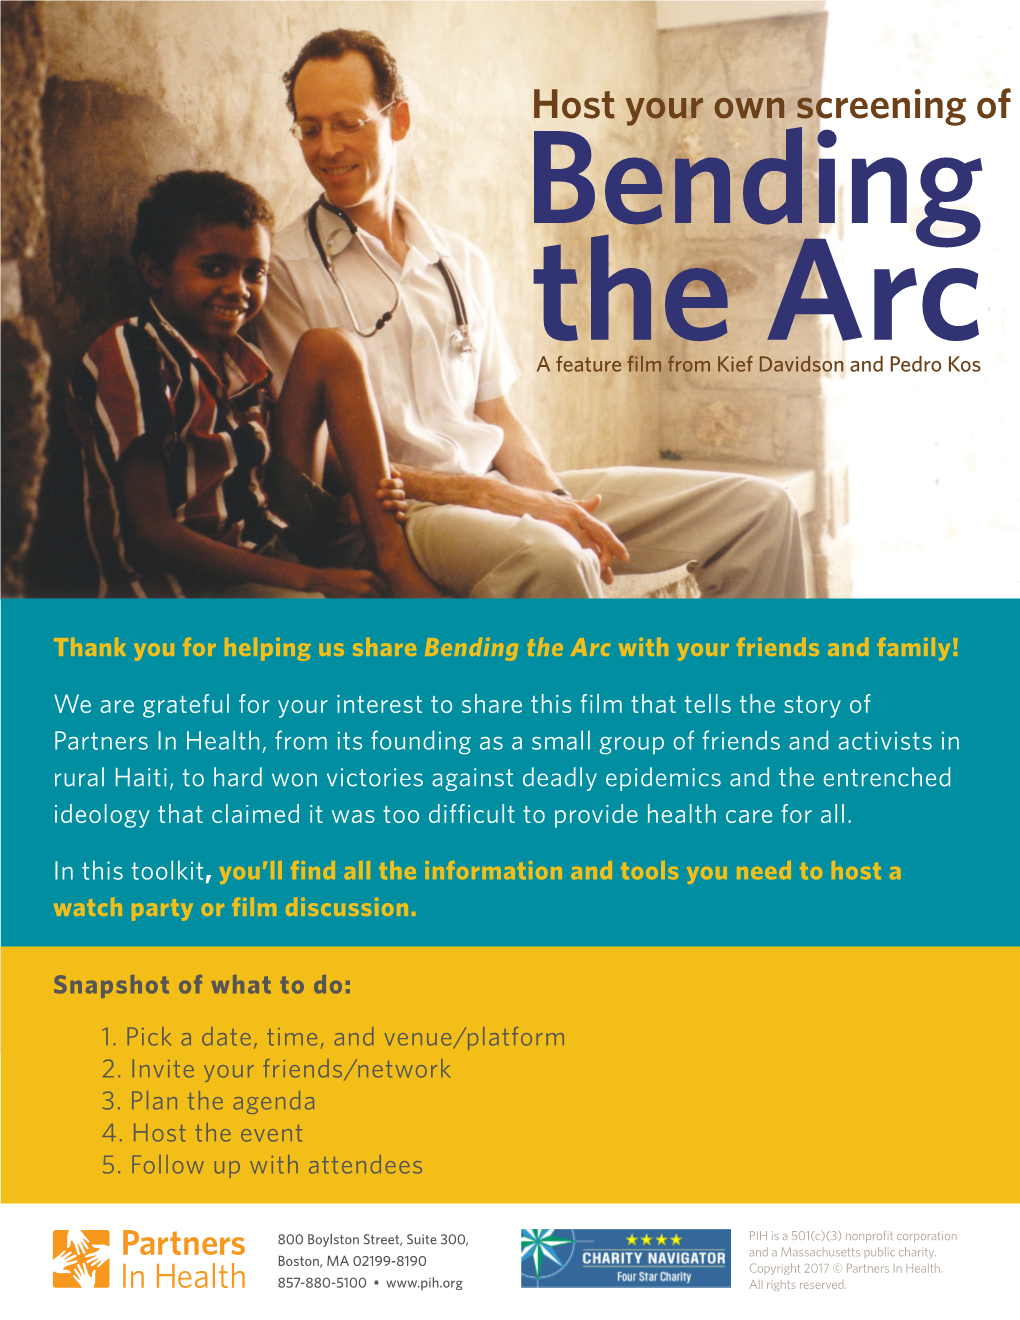 Host Your Own Screening of Bending the Arc